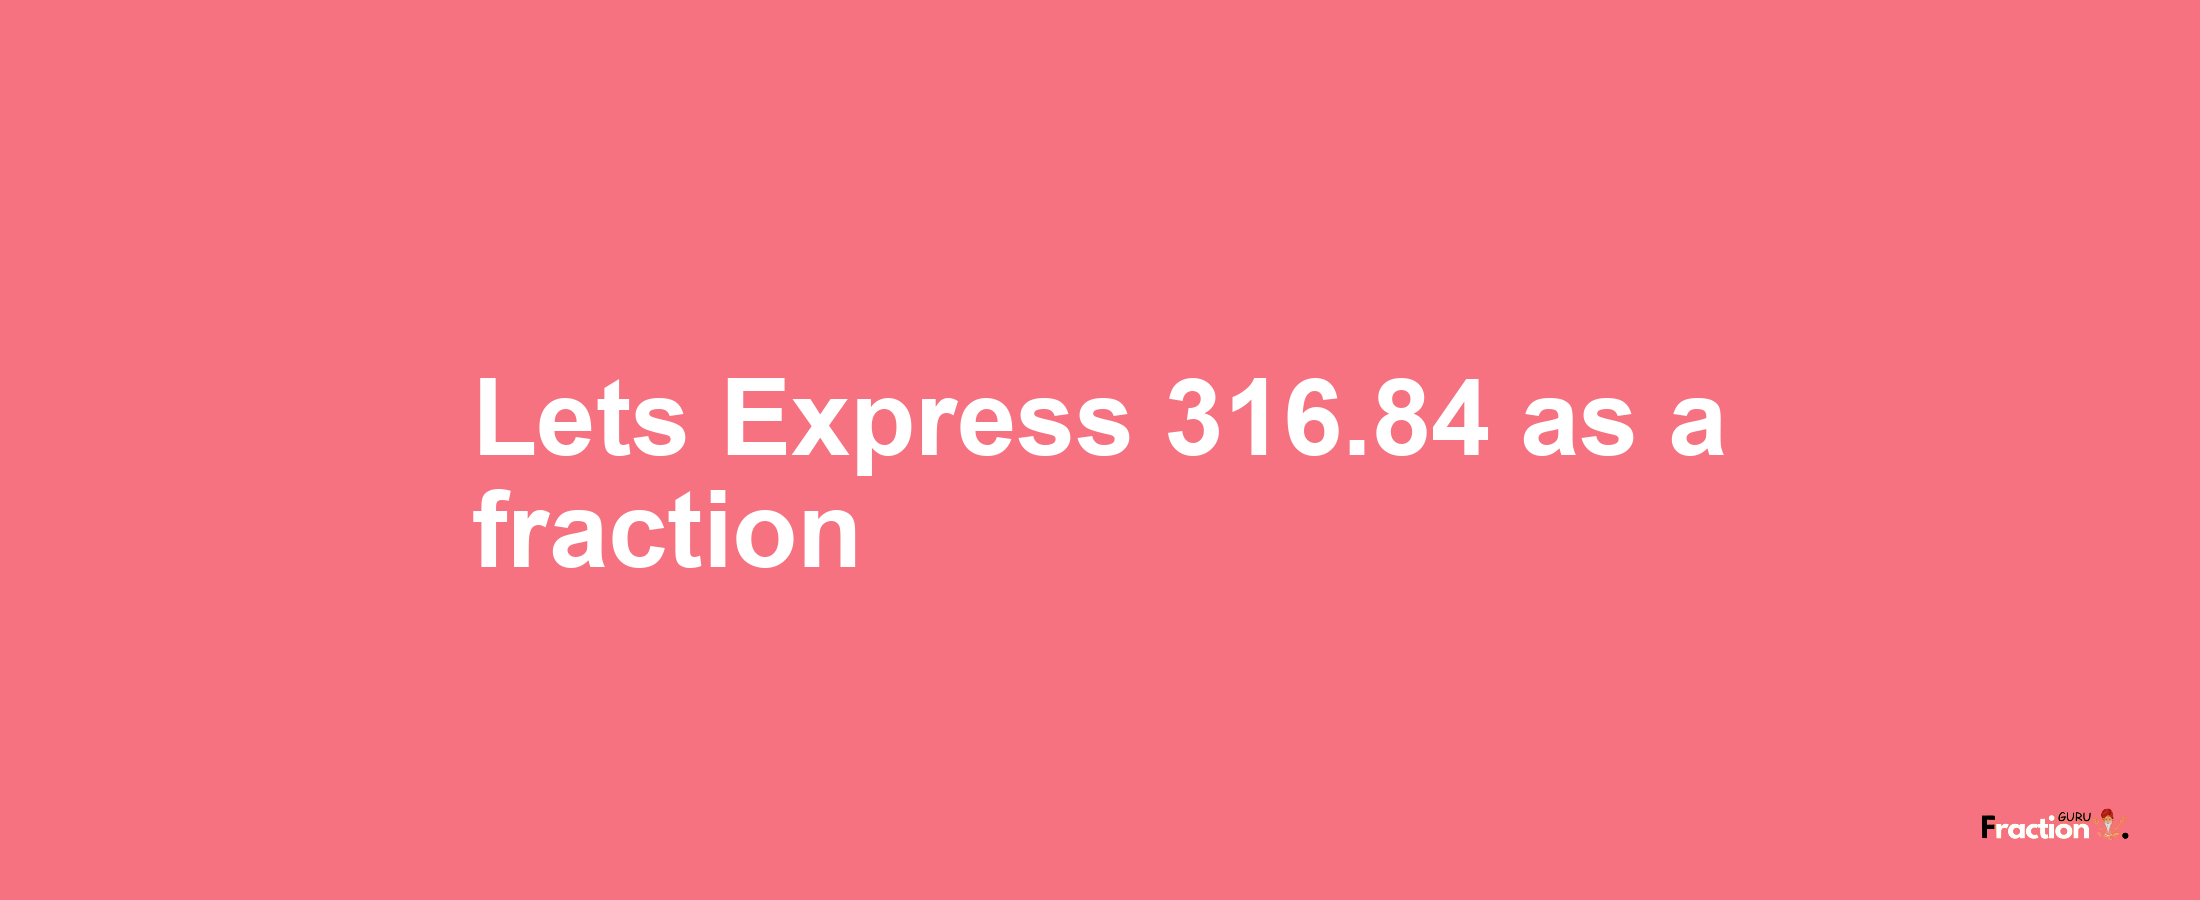 Lets Express 316.84 as afraction